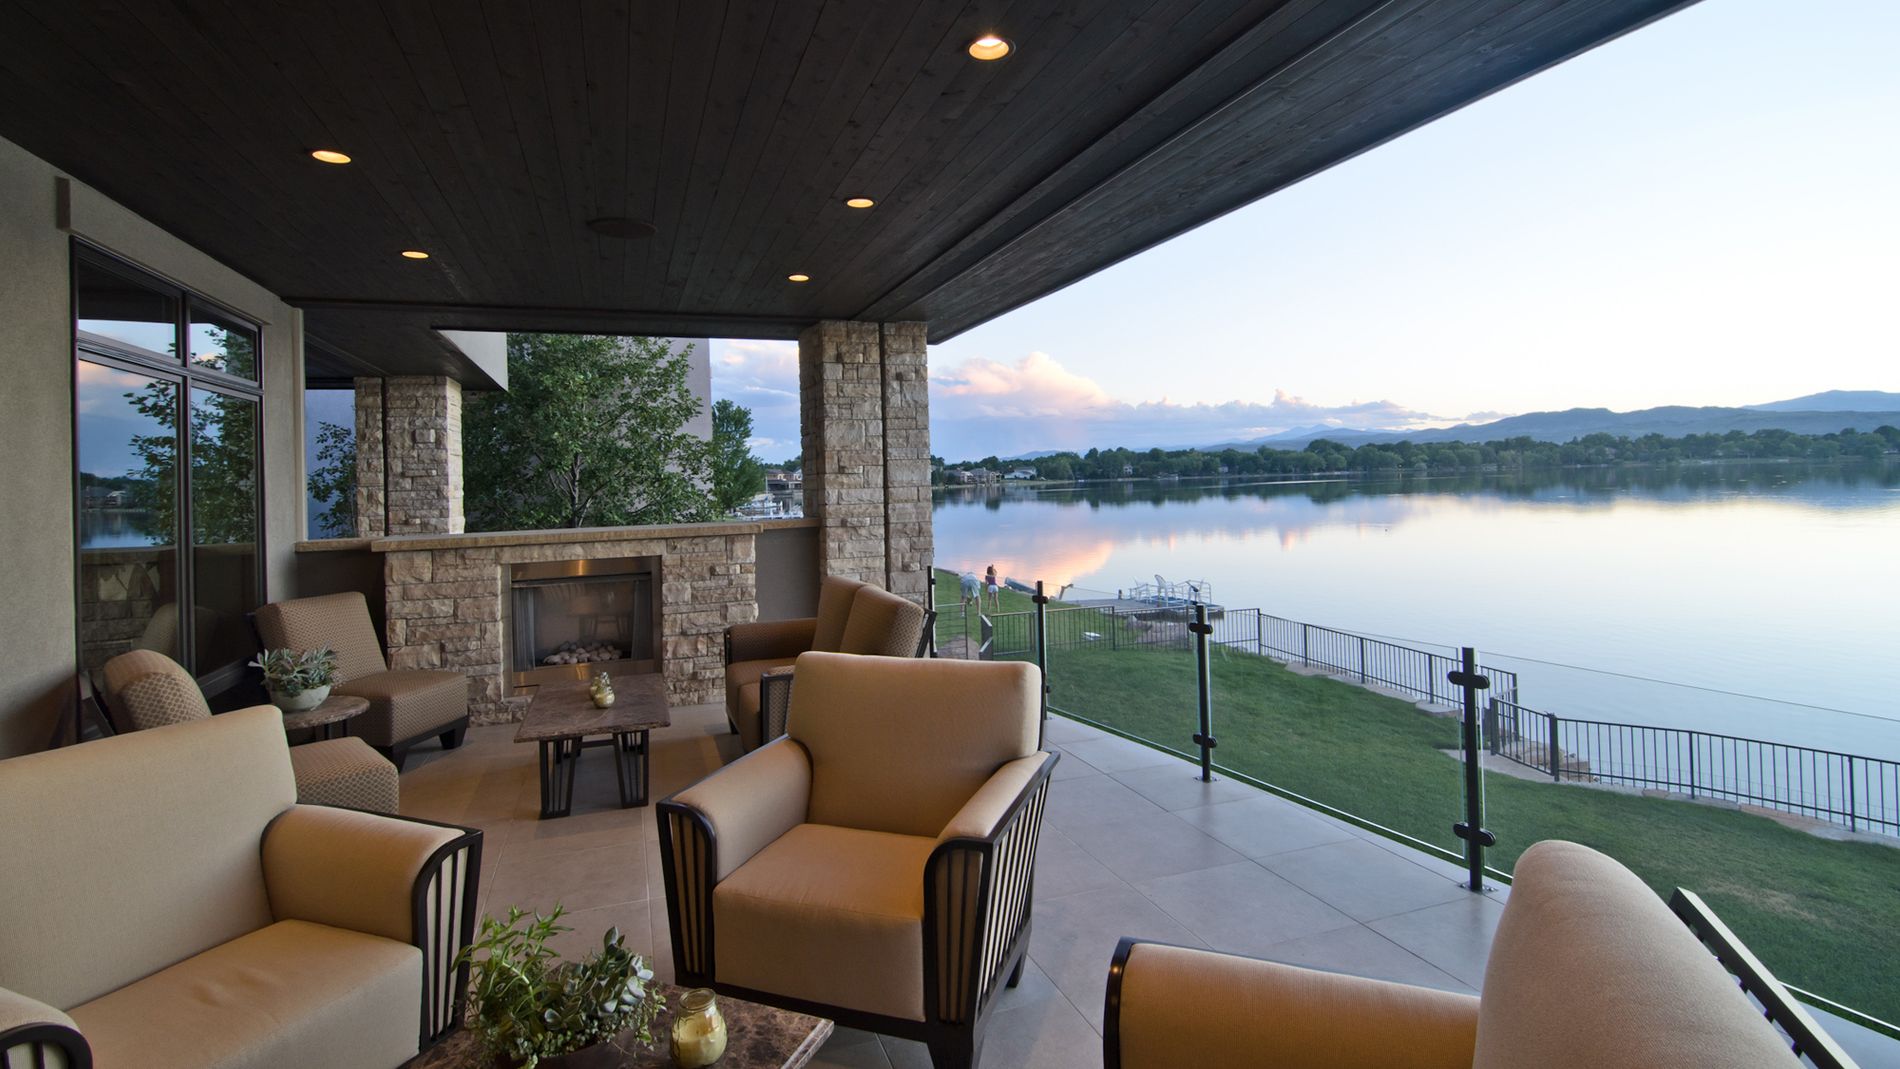 Outdoor living deck with landscape and lake views